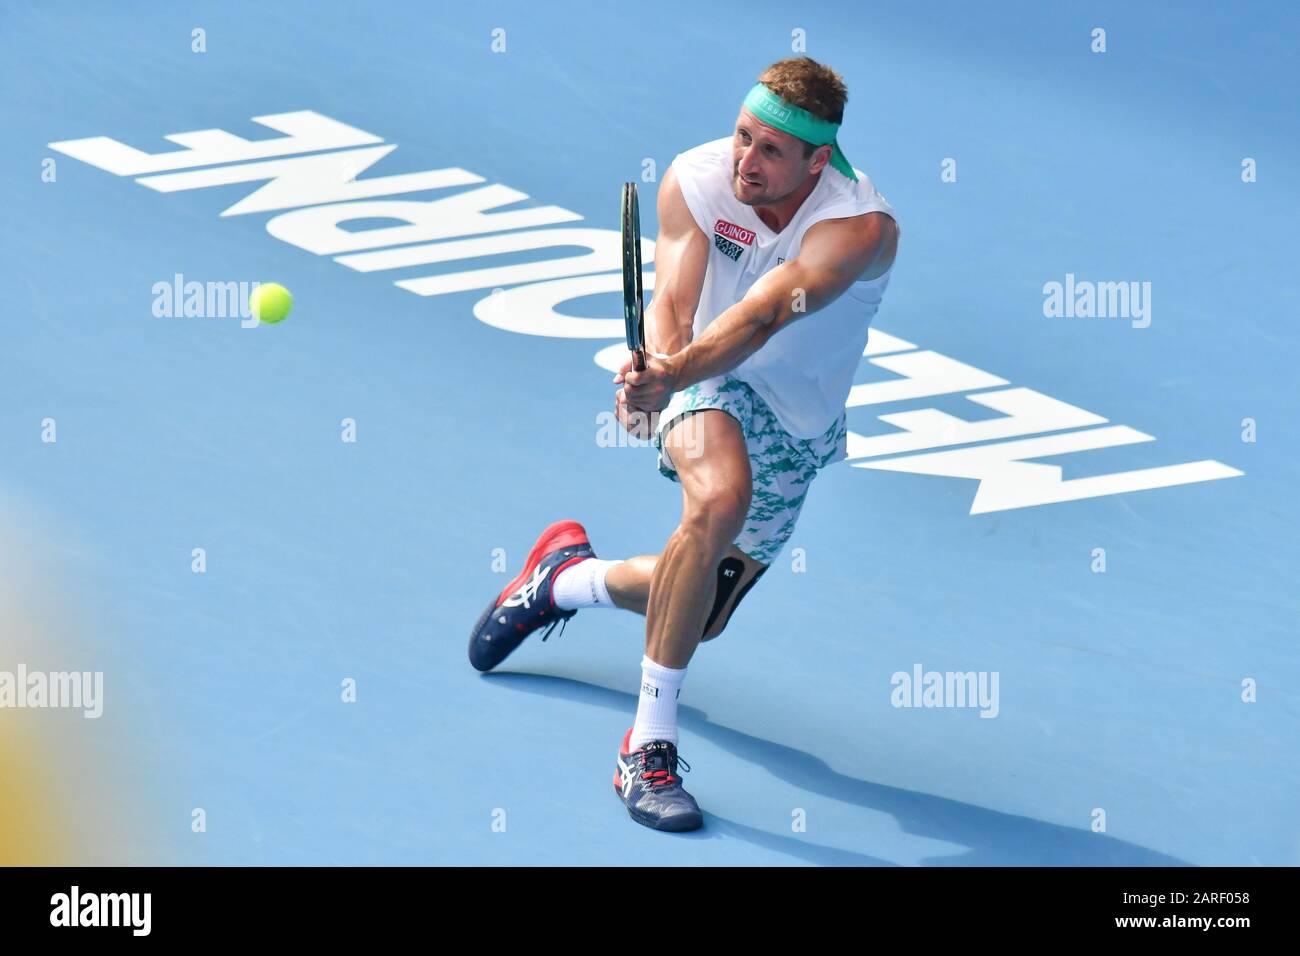 Melbourne, Australia. 28th Jan, 2020. TENNYS SANDGREN (USA) in action against 3rd seed ROGER FEDERER (SUI) on Rod Laver Arena in a Men's Singles Quarterfinals match on day 9 of the Australian Open 2020 in Melbourne, Australia. Sydney Low/Cal Sport Media. Federer won 63 26 26 76 63. Credit: csm/Alamy Live News Stock Photo